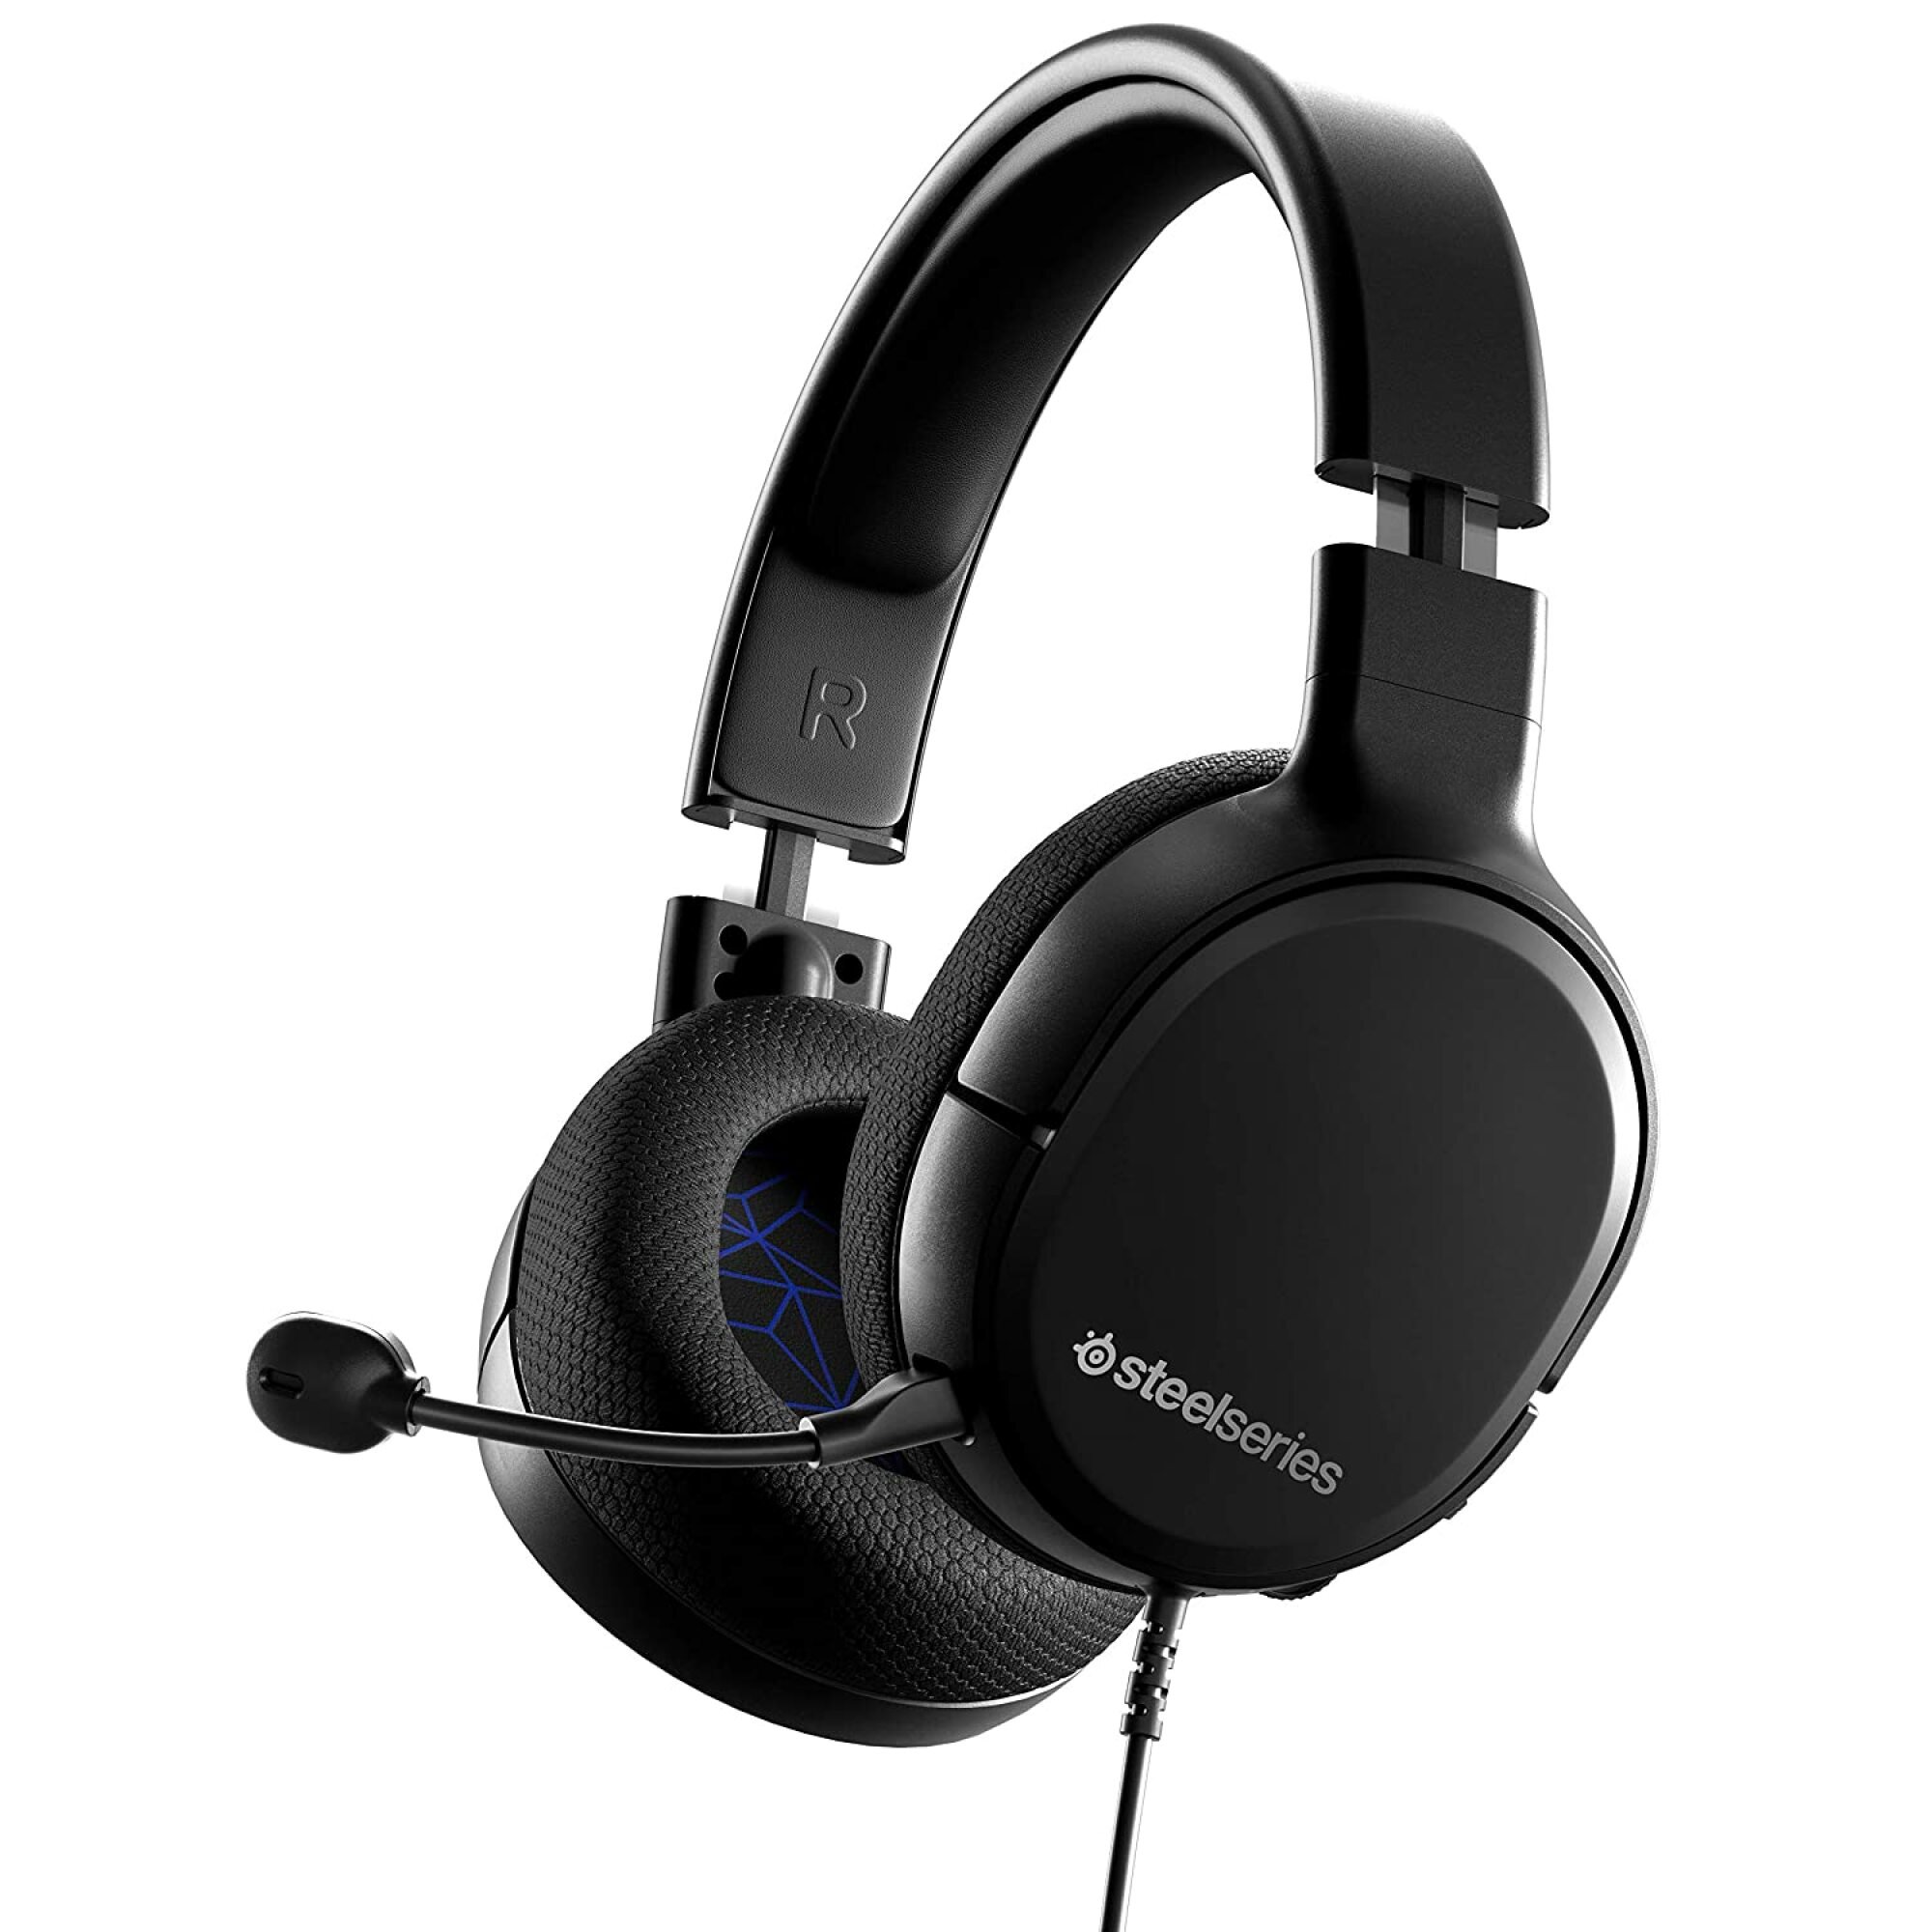 SteelSeries Arctis 1 Wired Gaming Headset on a white background.